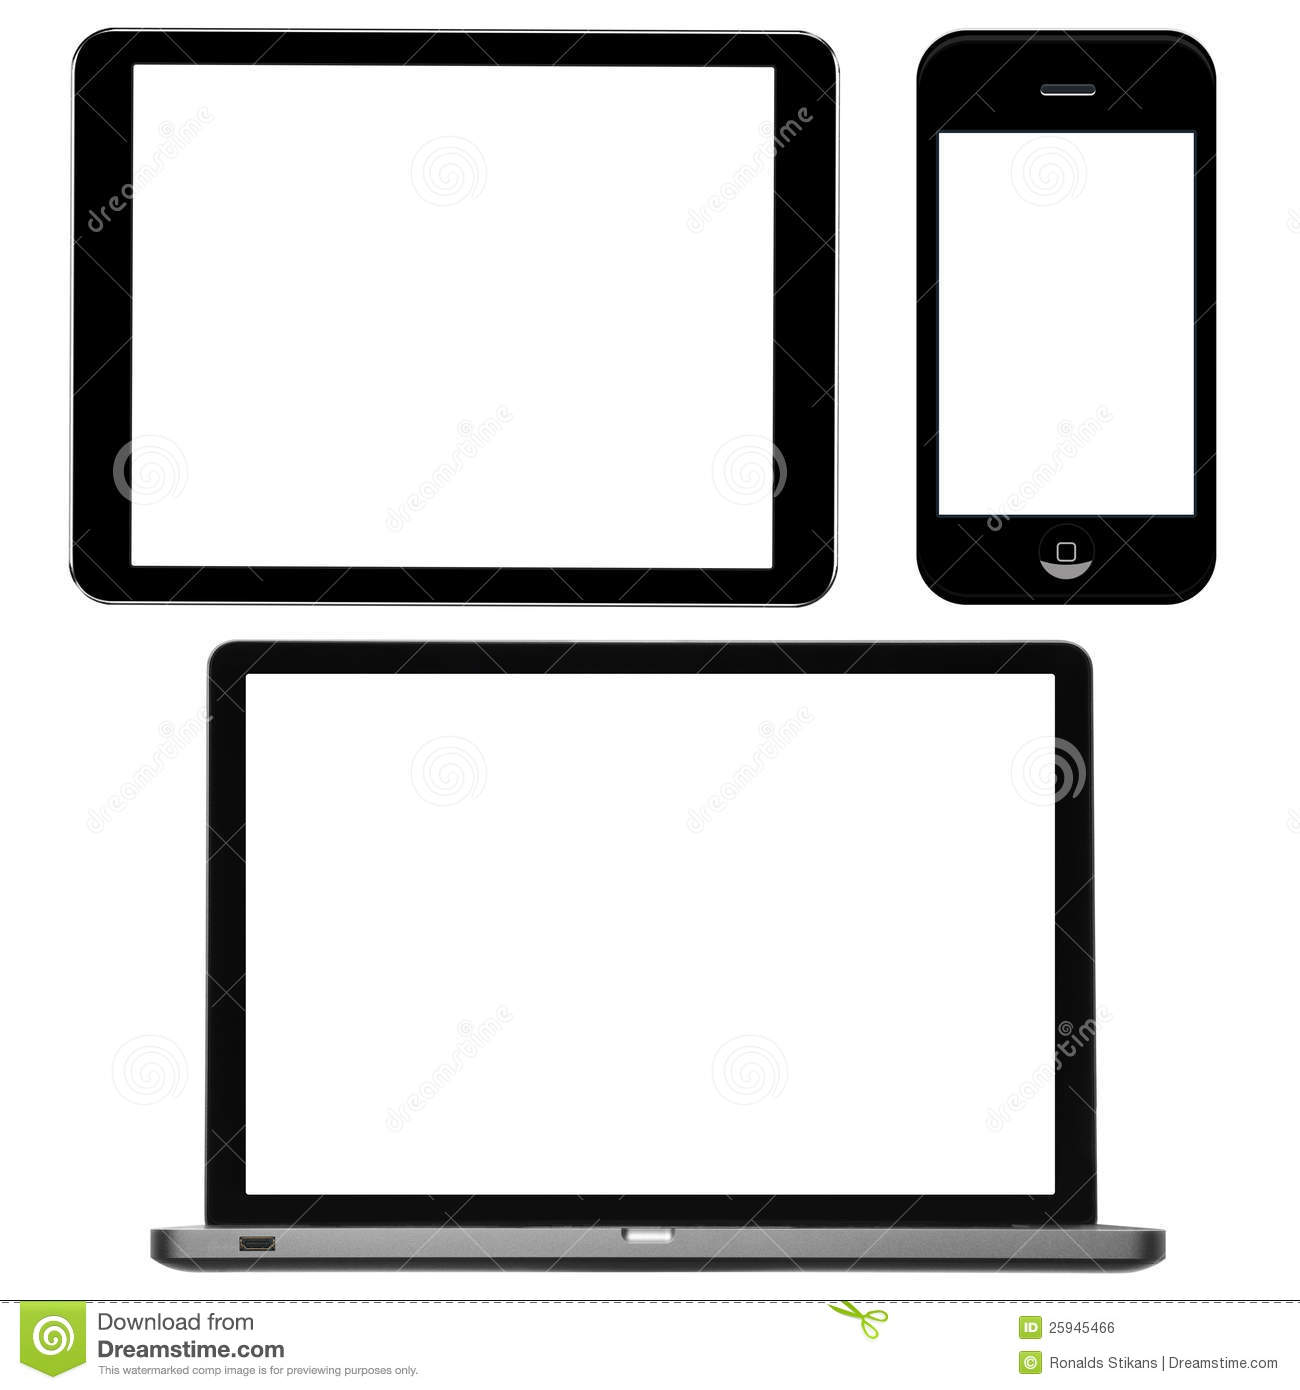 Laptop Digital Tablet And Phone Royalty Free Stock Image   Image